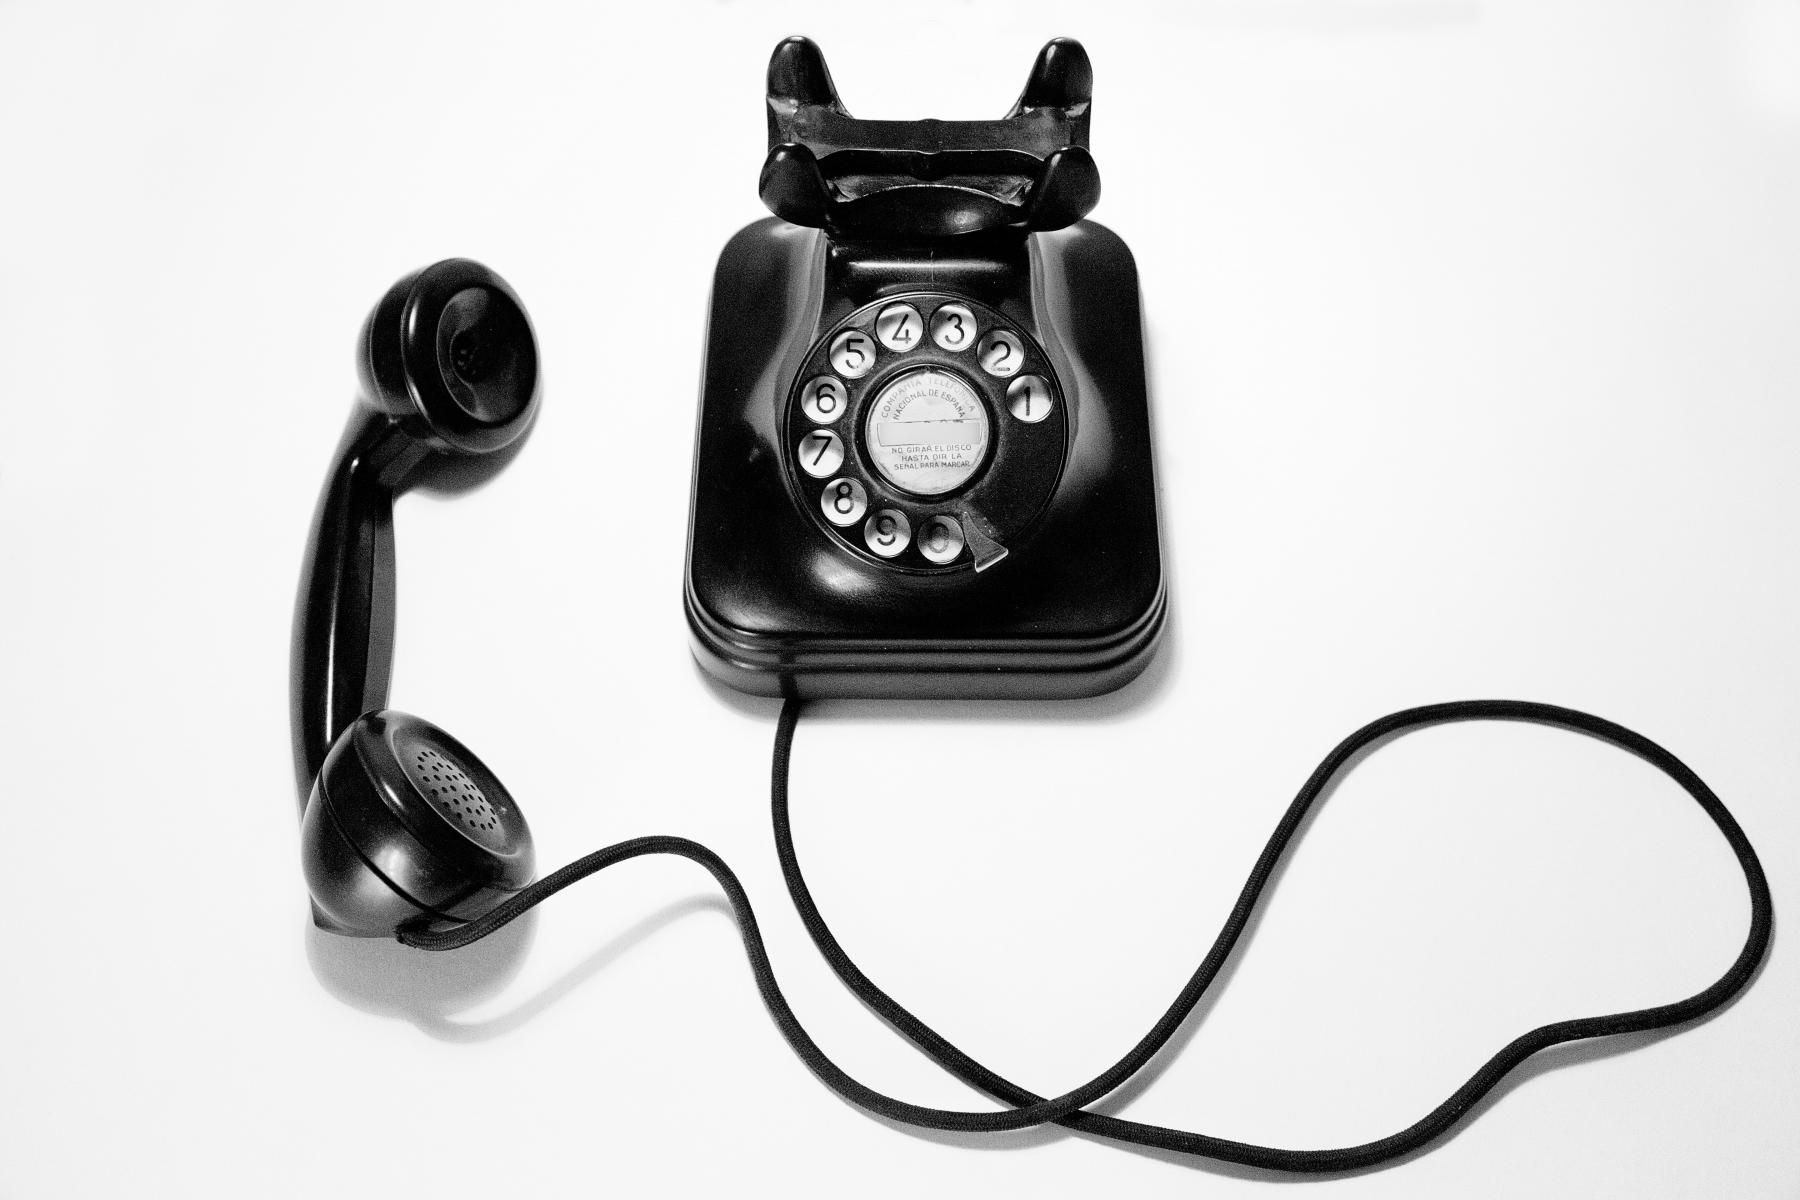 photo of a vintage dial telephone on a white background